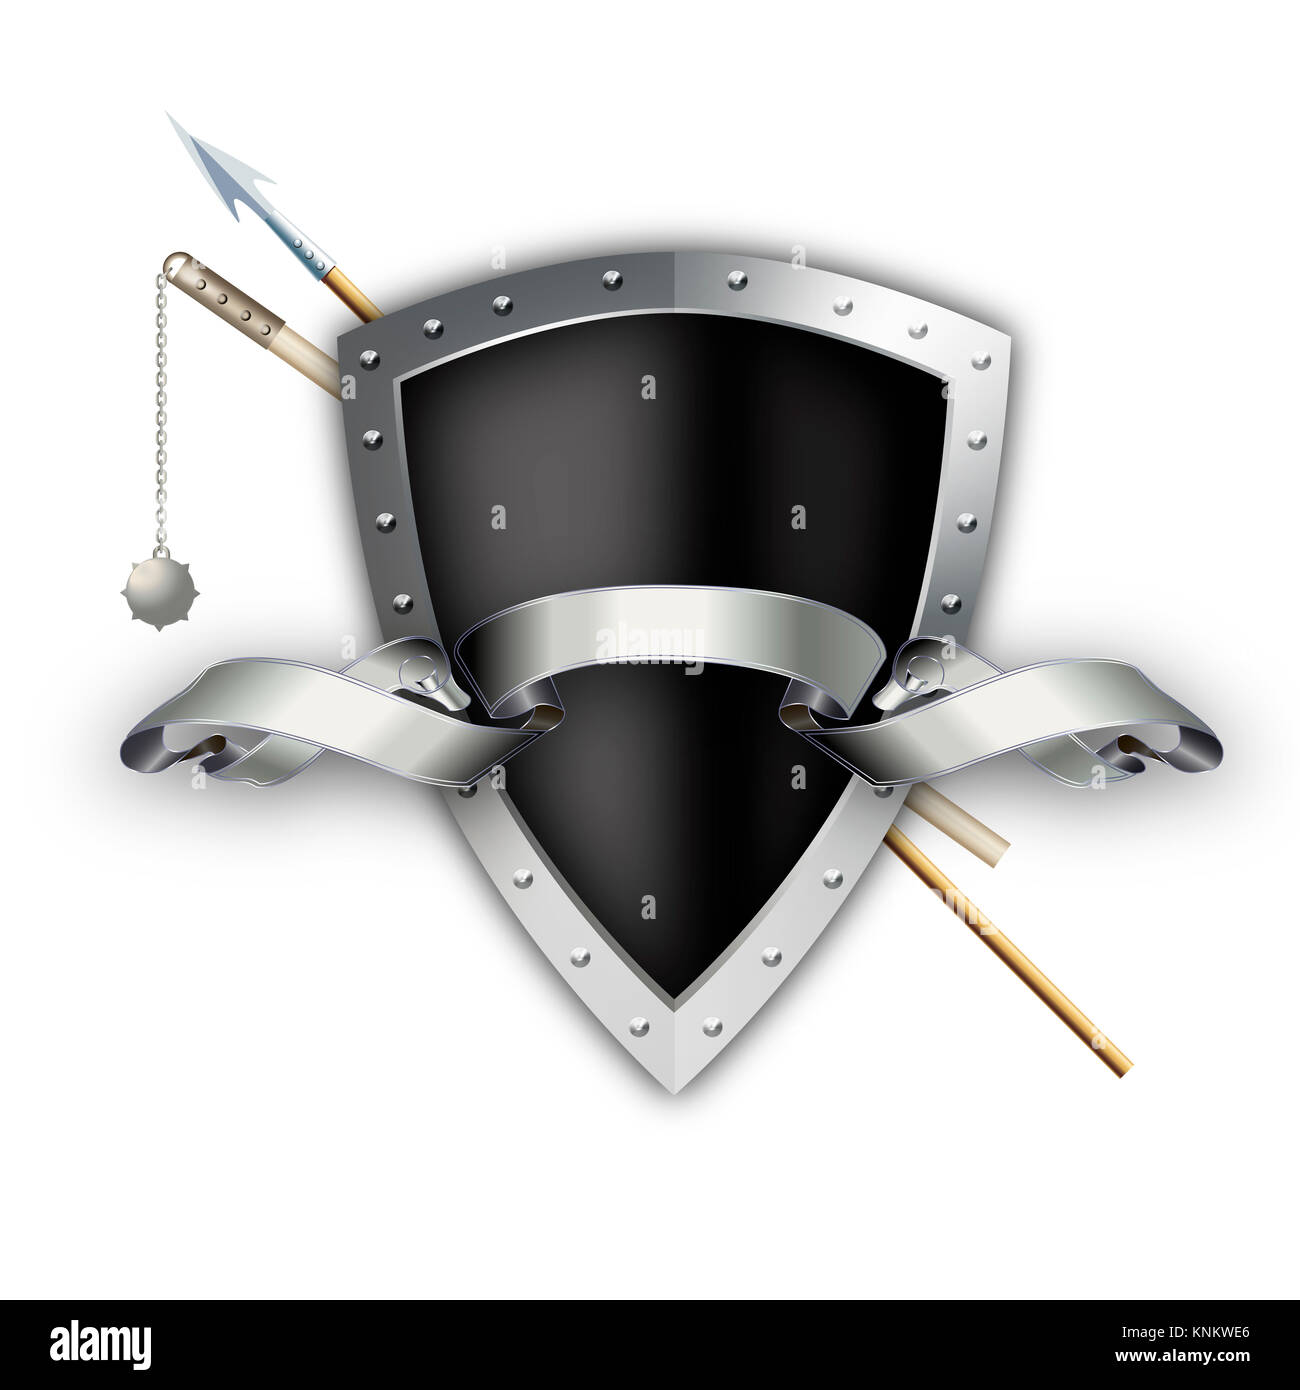 Black shield with silver riveted border and spear with mace on white background. Stock Photo